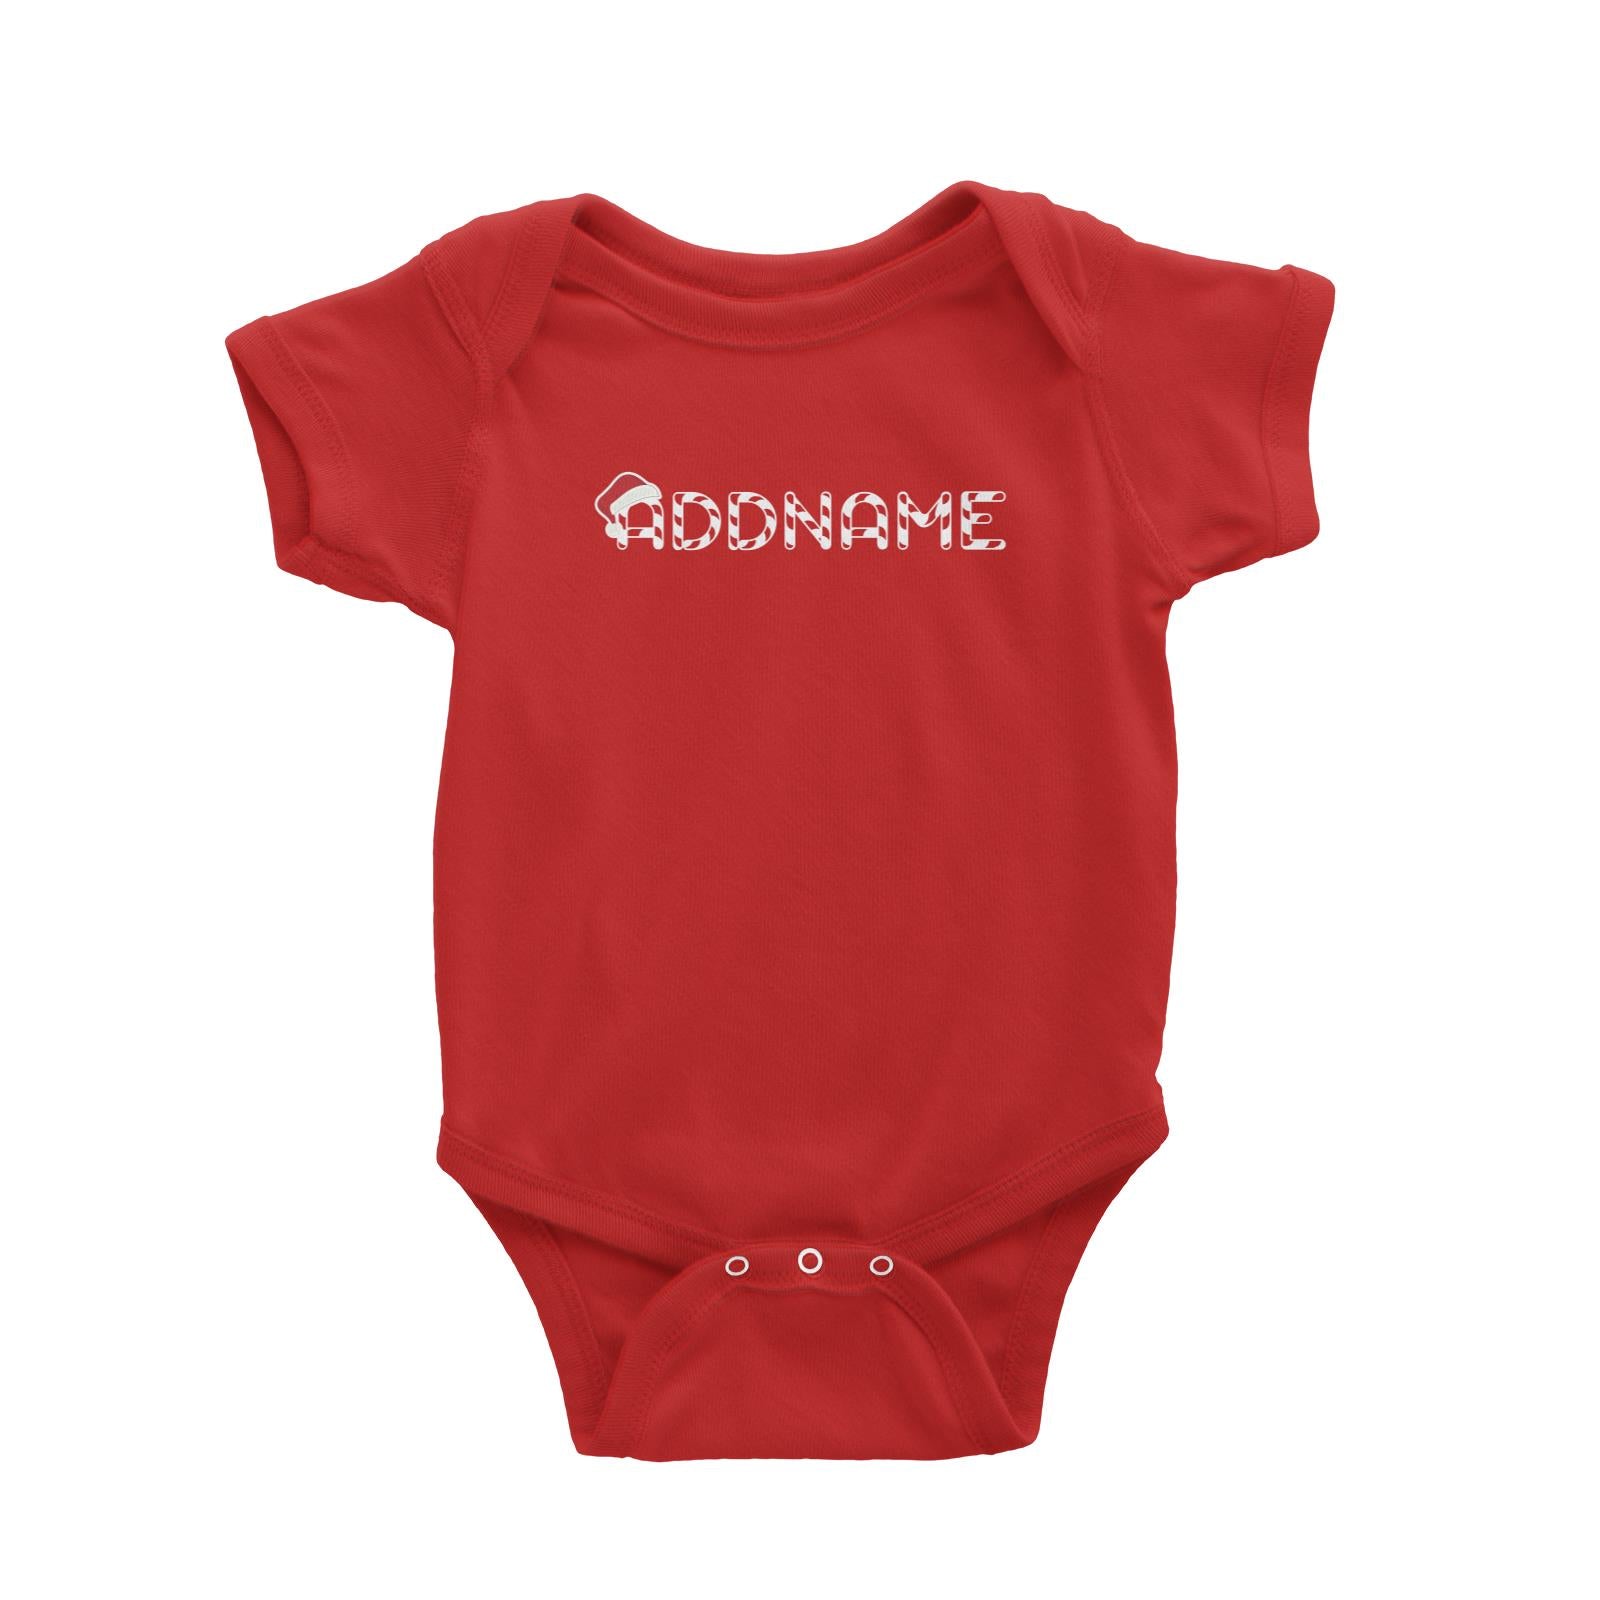 Candy Cane Alphabet Addname with Santa Hat Baby Romper Christmas Matching Family Personalizable Designs Lettering